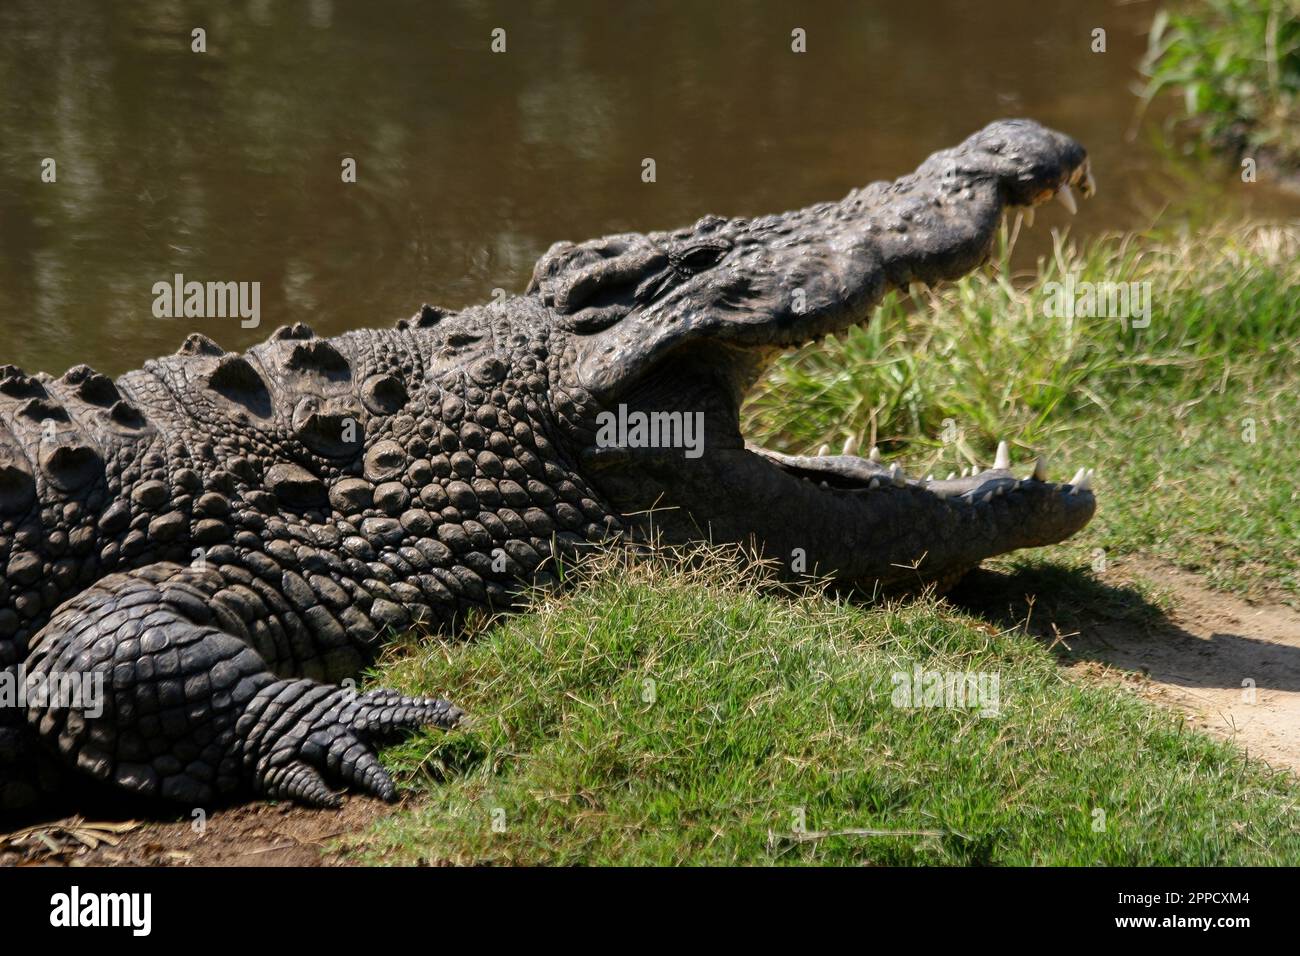 Crocodiles are a group of reptiles with bony scales that inhabit swamps and water bodies in warm regions. Stock Photo